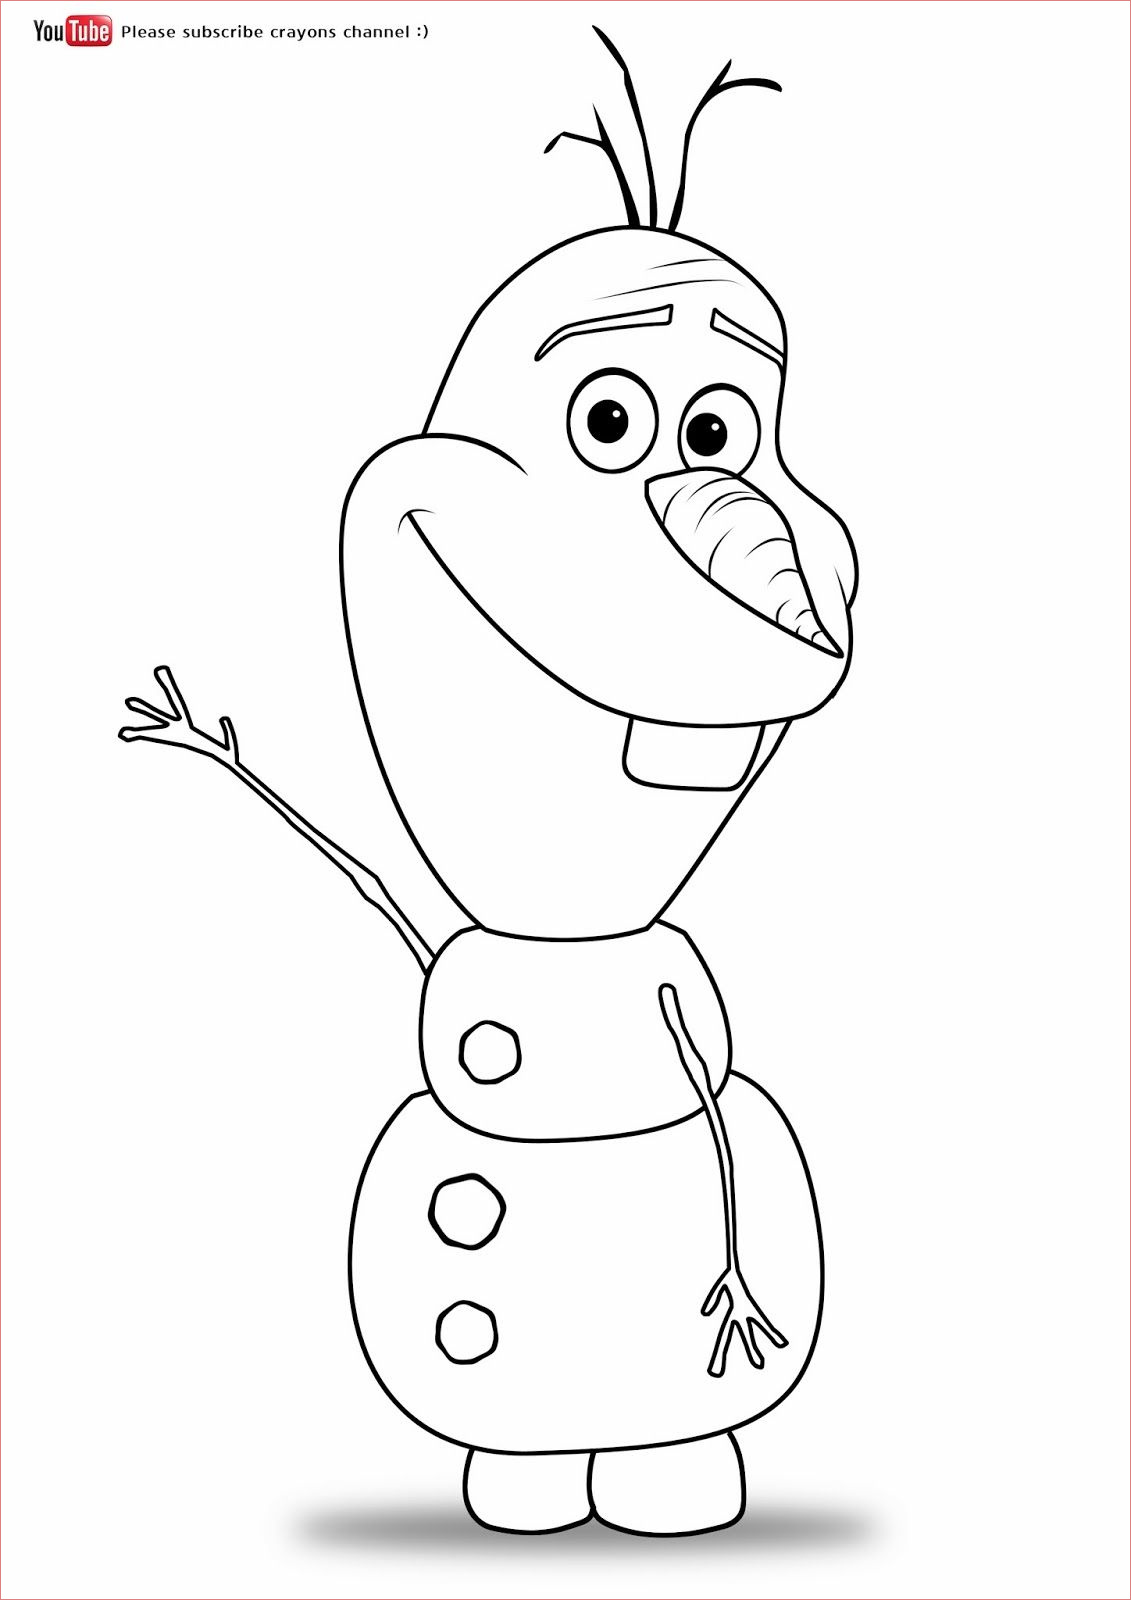 Coloriage Facile Disney Nice Olaf Coloring Pages Google Search with Images